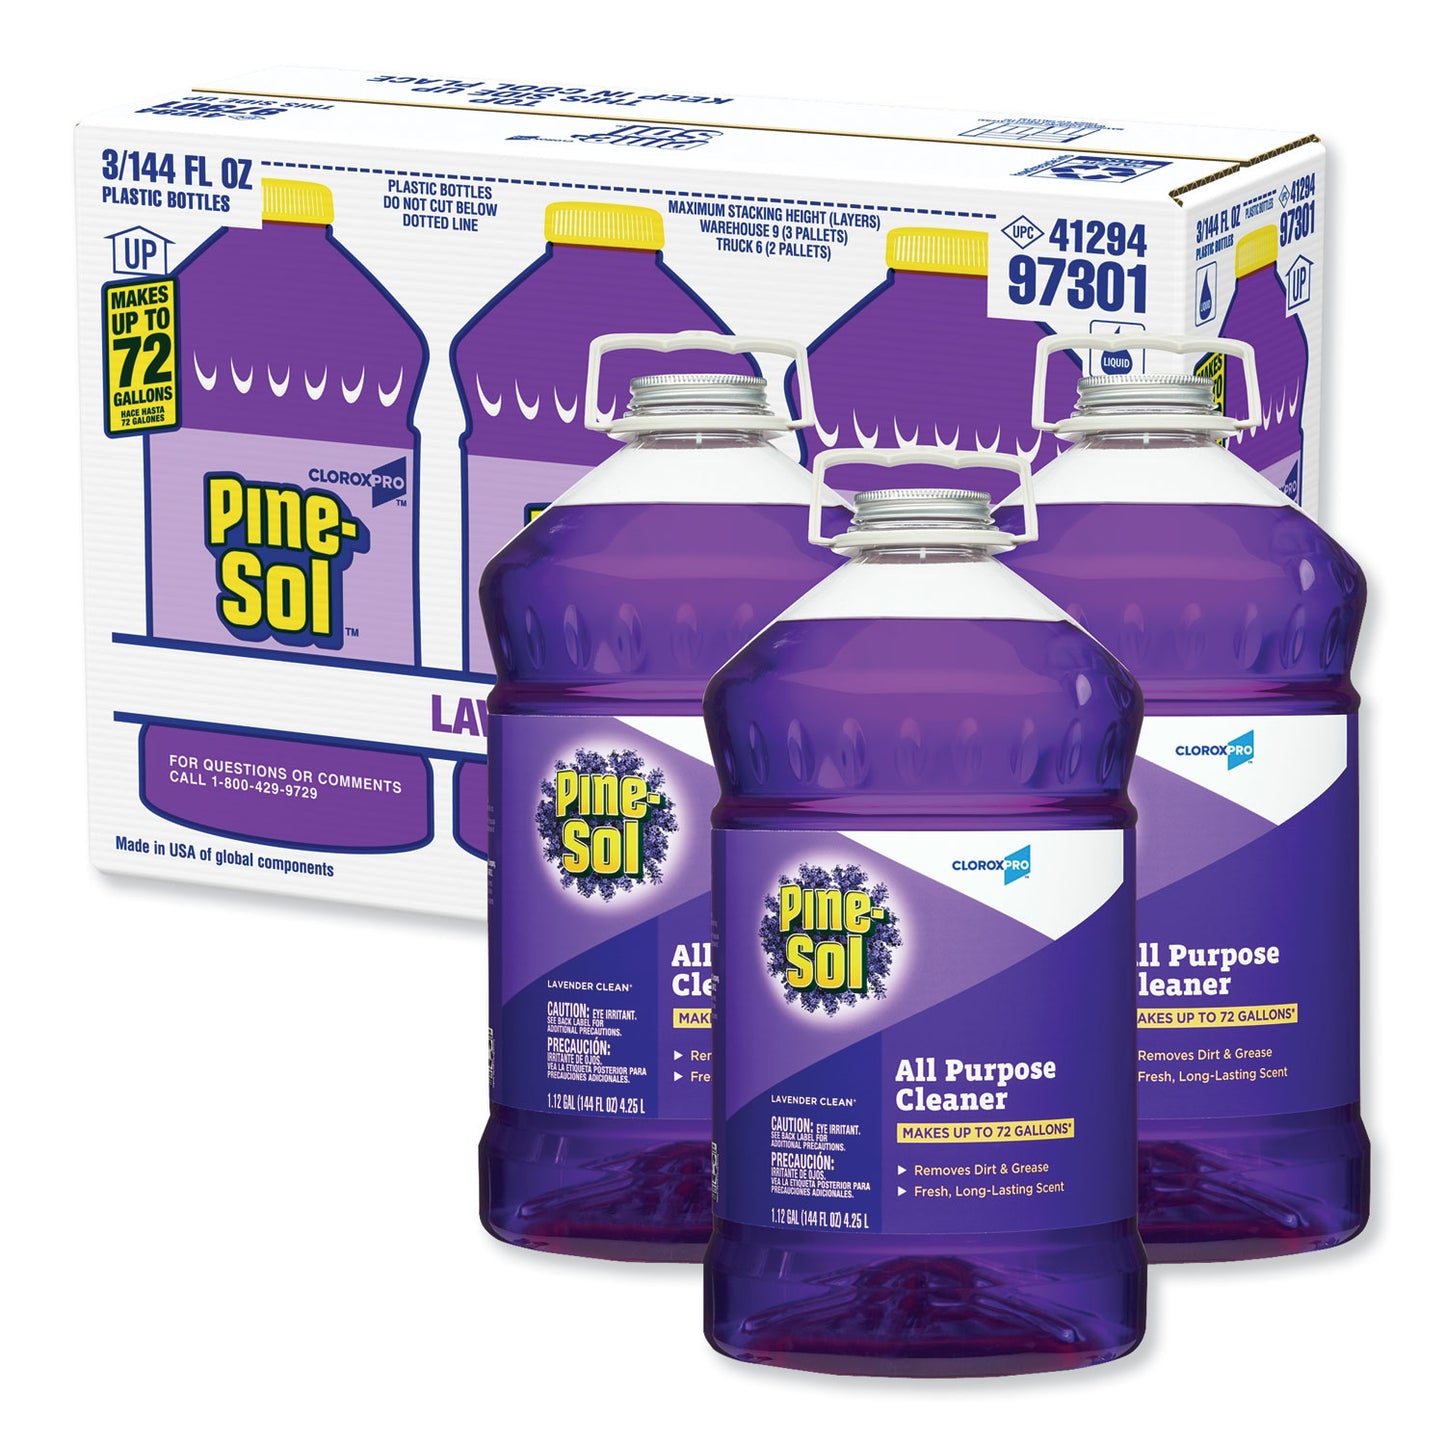 Clorox Pine-Sol All Purpose Cleaner 144 oz. Lavender Clean Scent (Pack of 3)